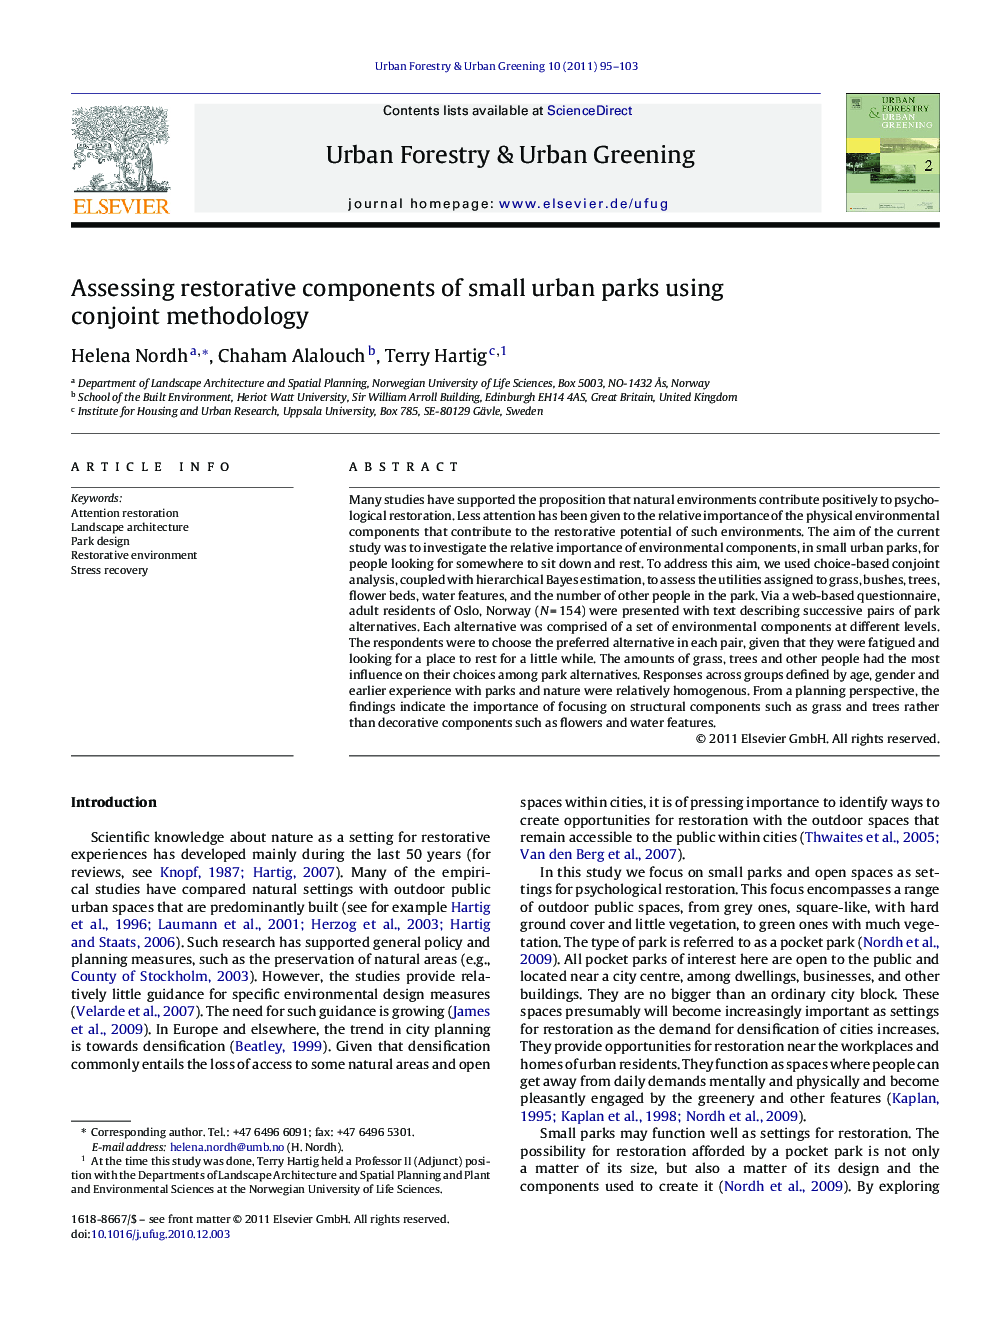 Assessing restorative components of small urban parks using conjoint methodology